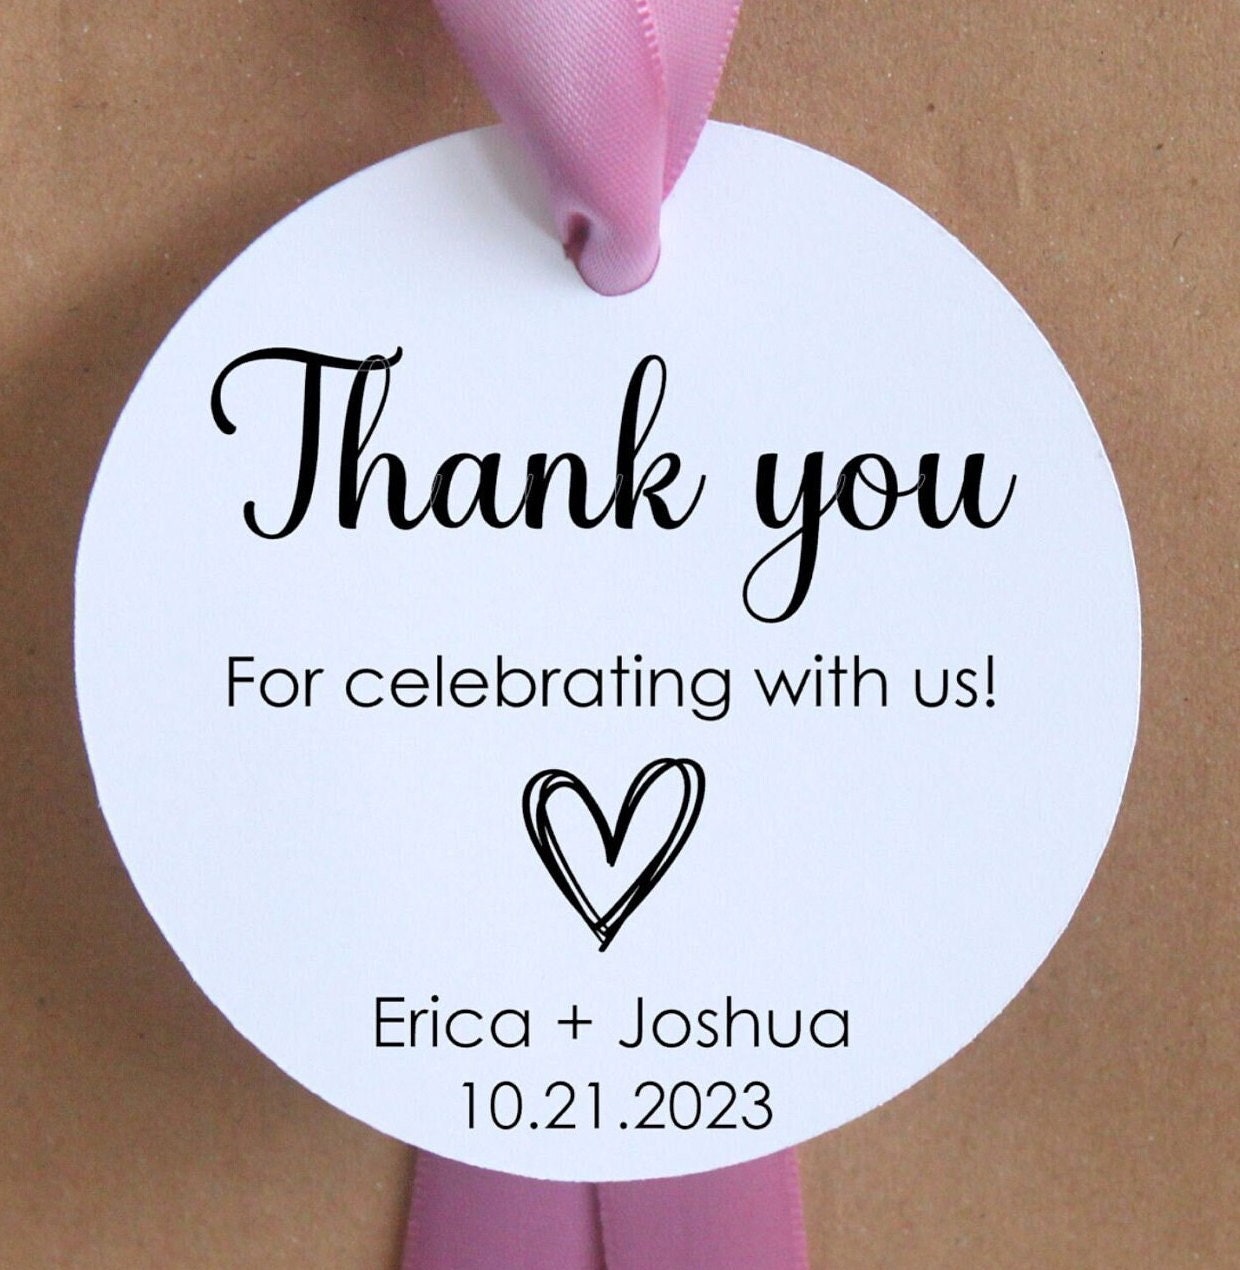 Wedding Tags, Thank You Welcome Bag, Out of Town Guests